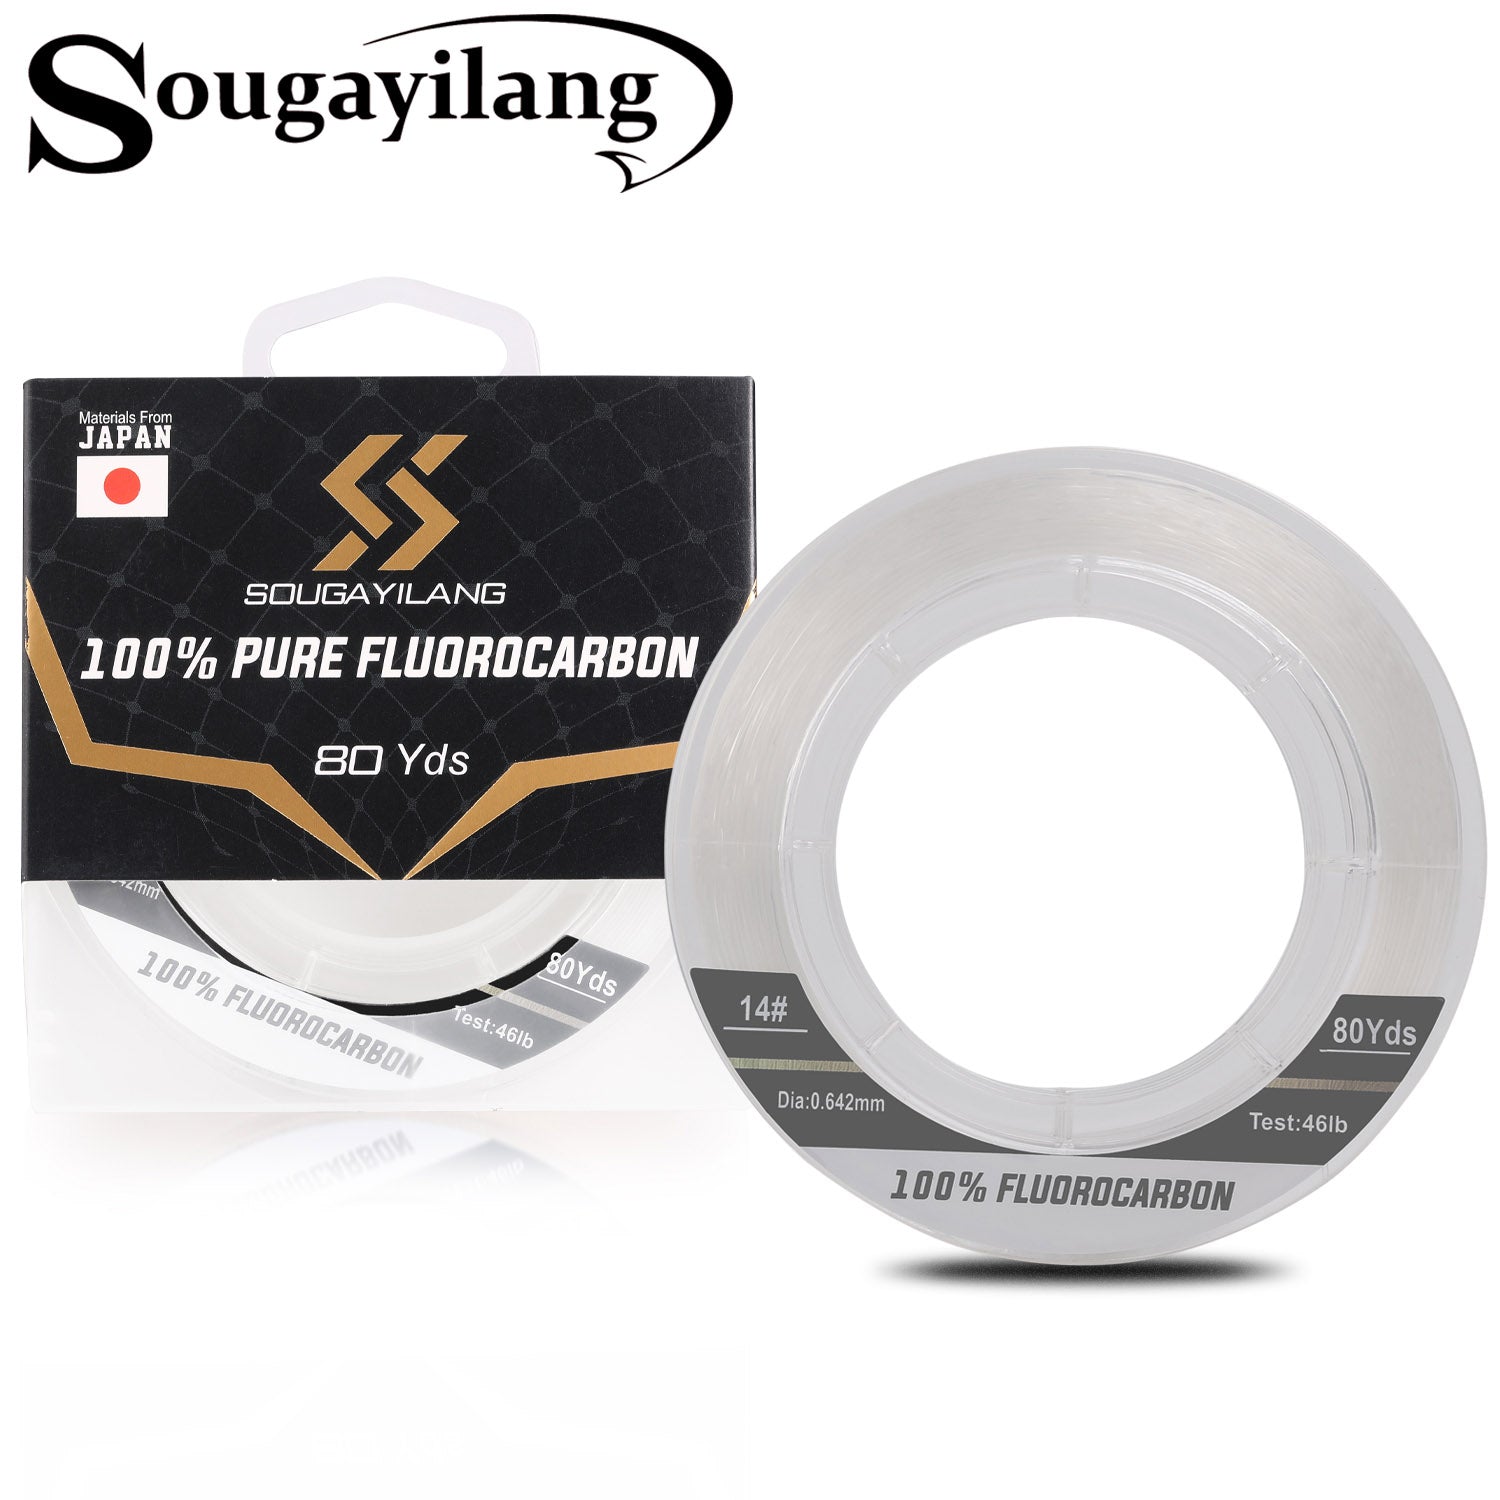 Sougayilang Fluorocarbon Fishing Line - 100% Pure Fluorocarbon Leader  80Yds, Materials from Japan, Clear